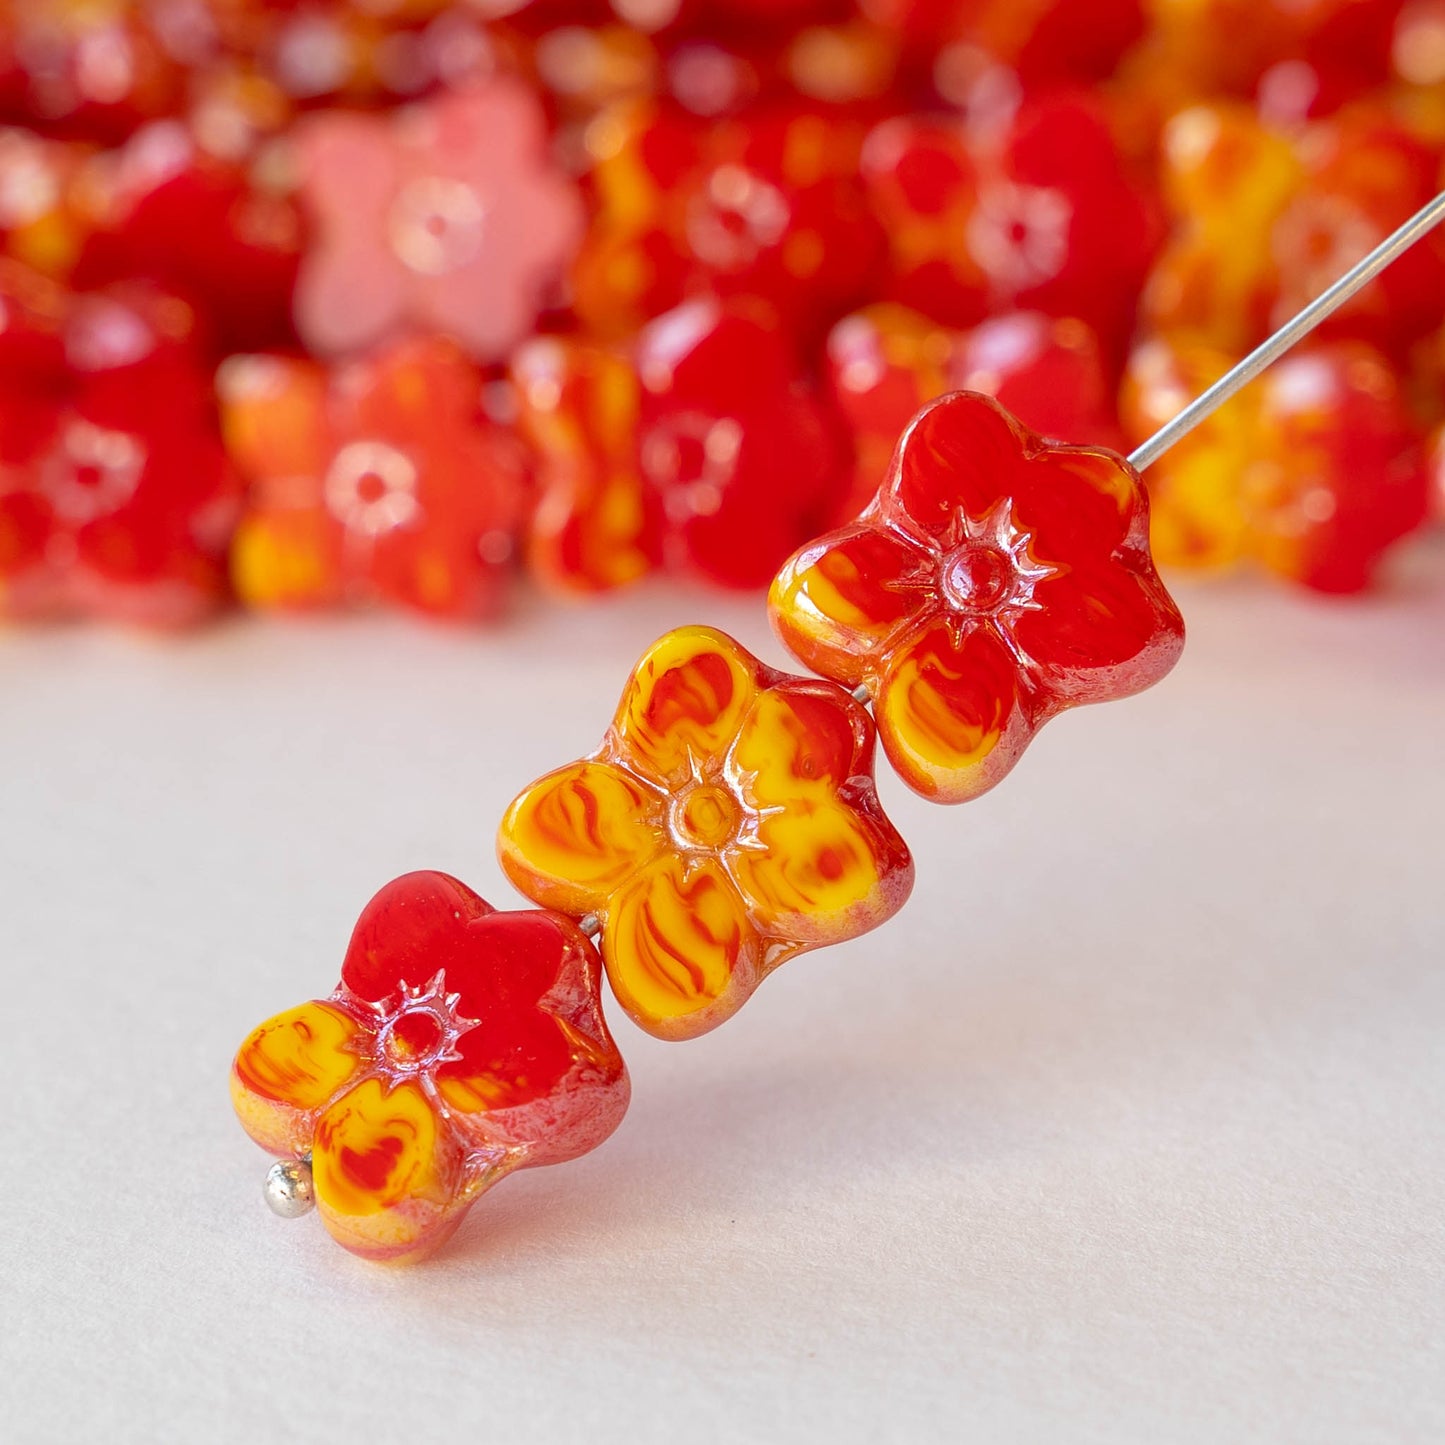 12x14mm Flower Beads - Red Yellow Mix - 10 Beads